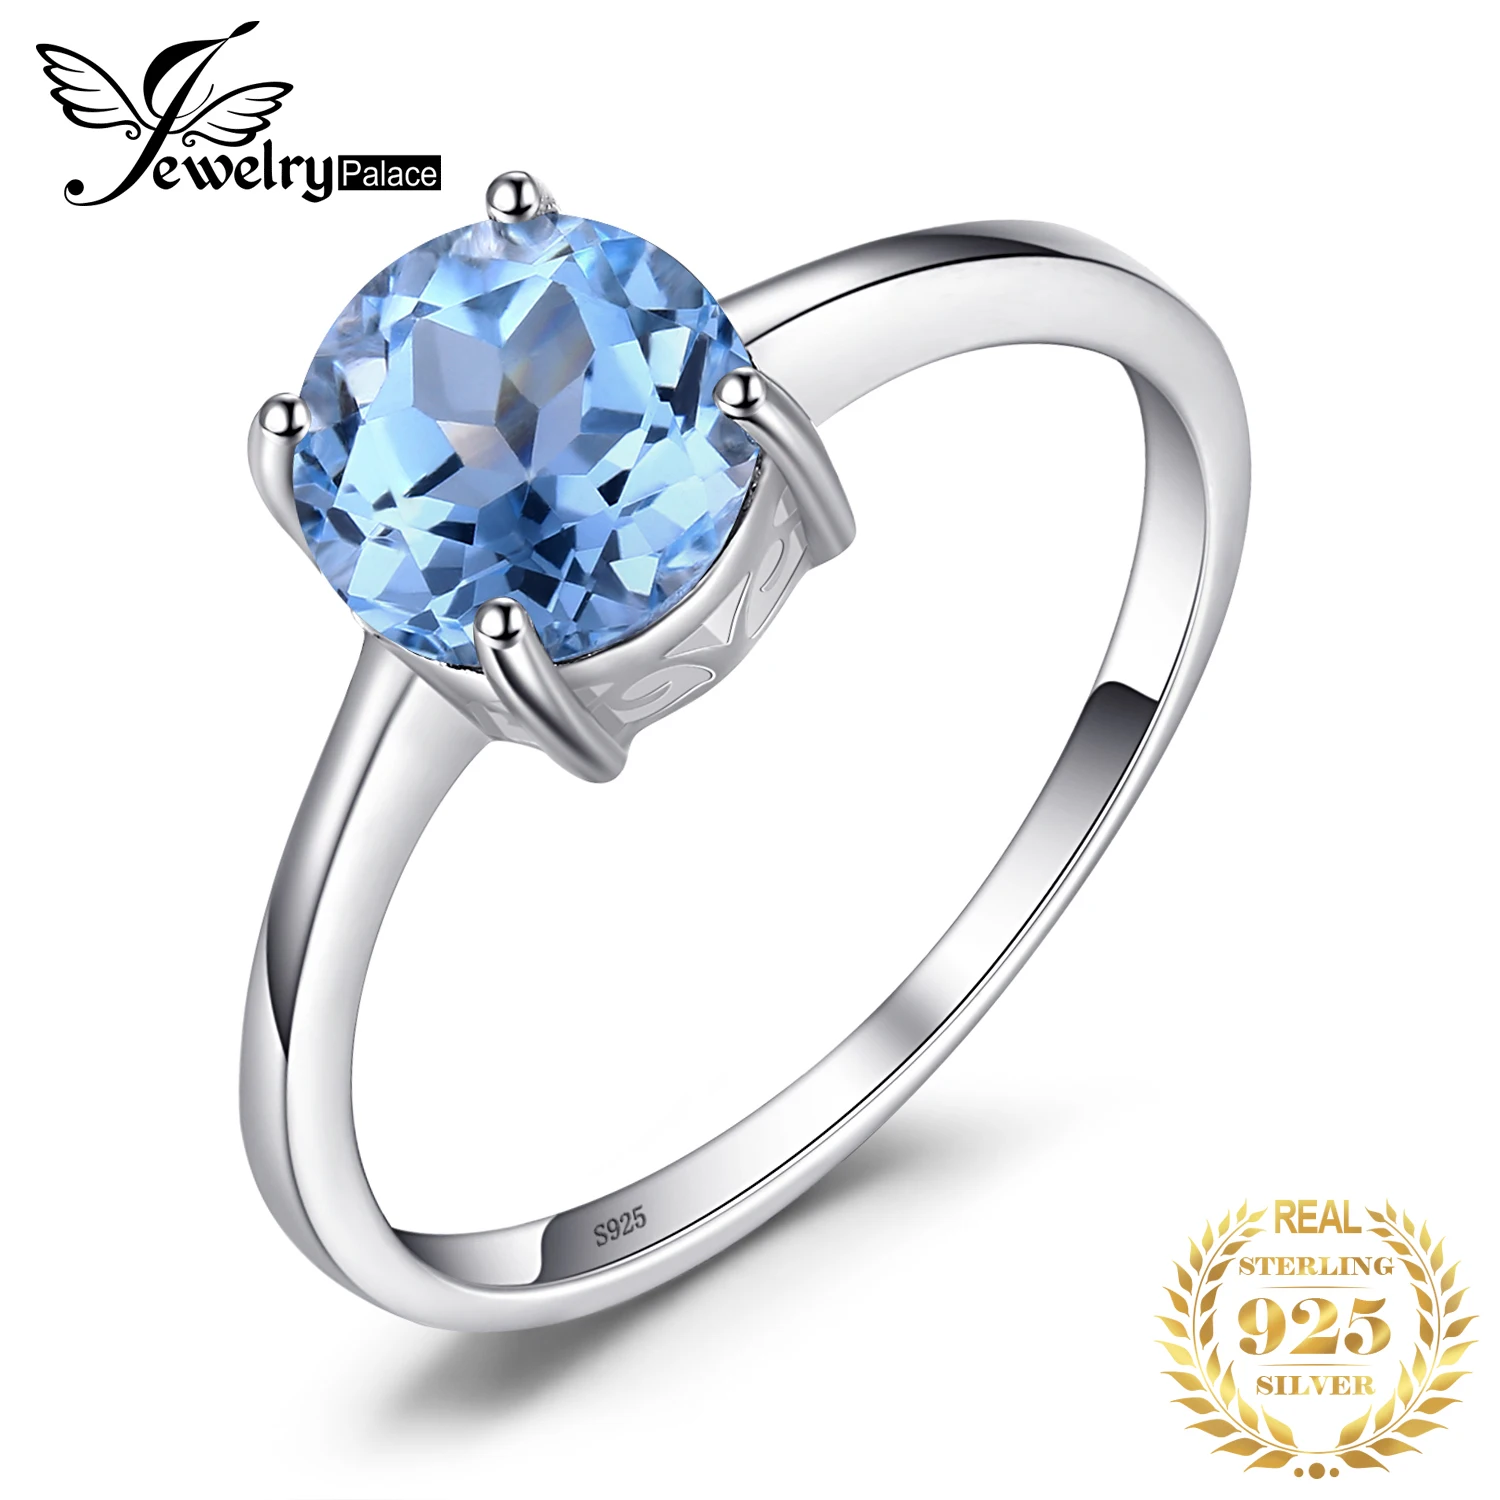 

JewelryPalace 1.6ct Natural Sky Blue Topaz 925 Sterling Silver Ring for Women Solitaire Gemstone Fine Jewelry Anniversary Gift